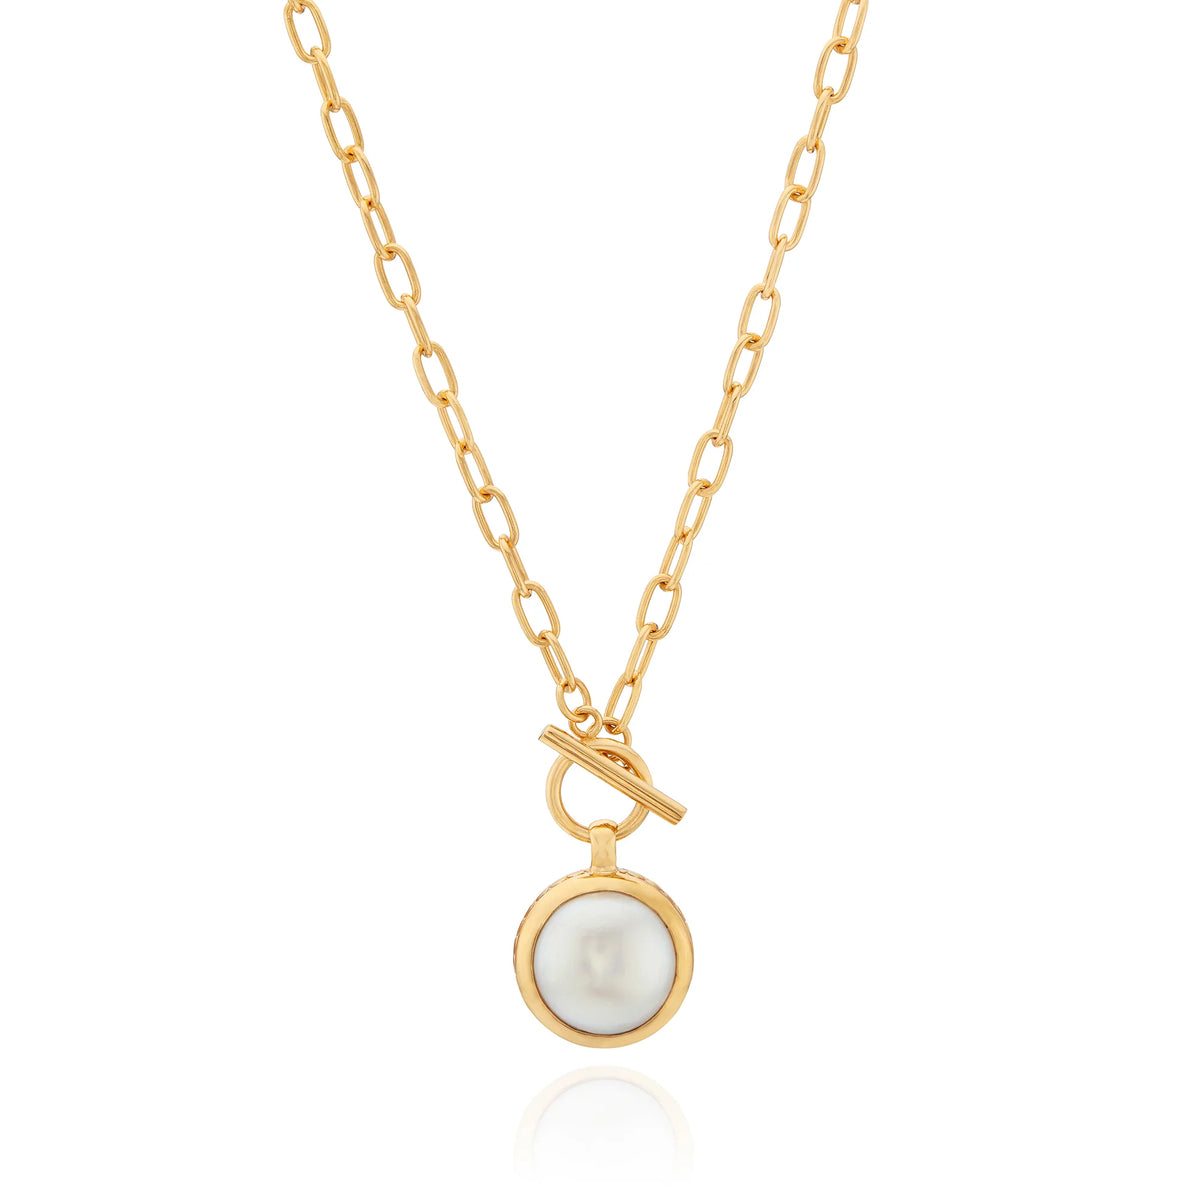 Gold necklace with toggle fastening and circular pearl pendant 